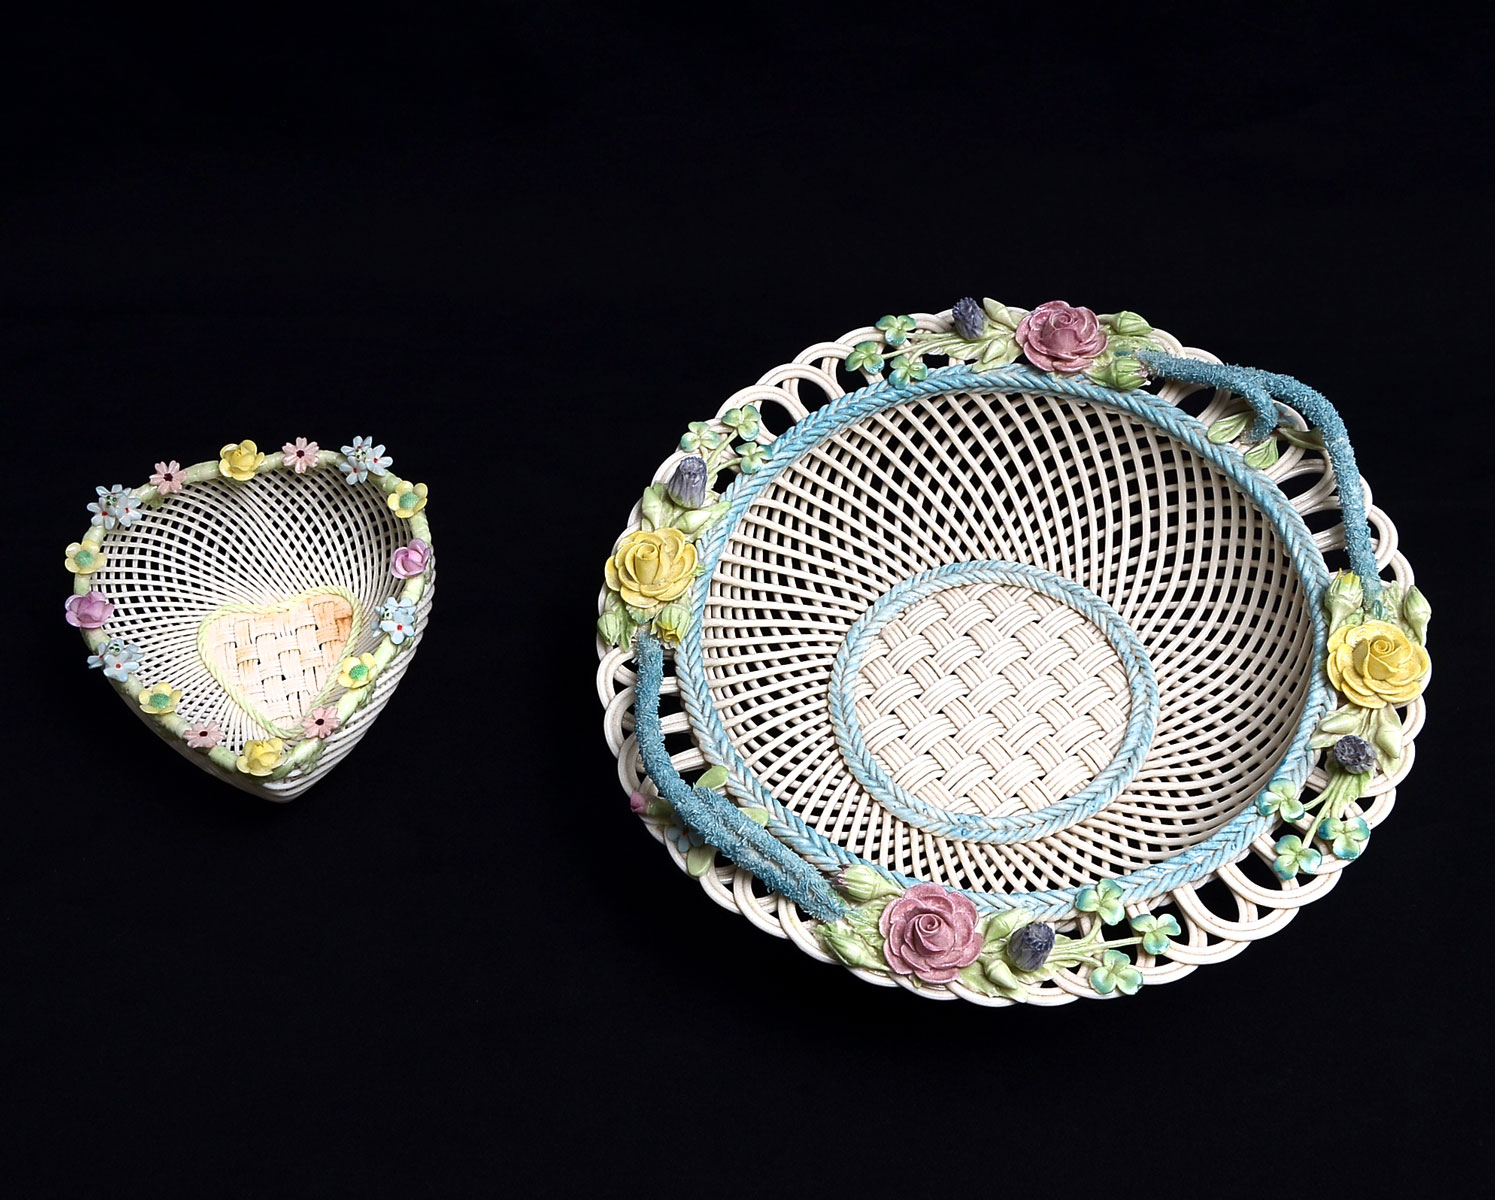 2 PIECE BELLEEK RETICULATED DISHES: